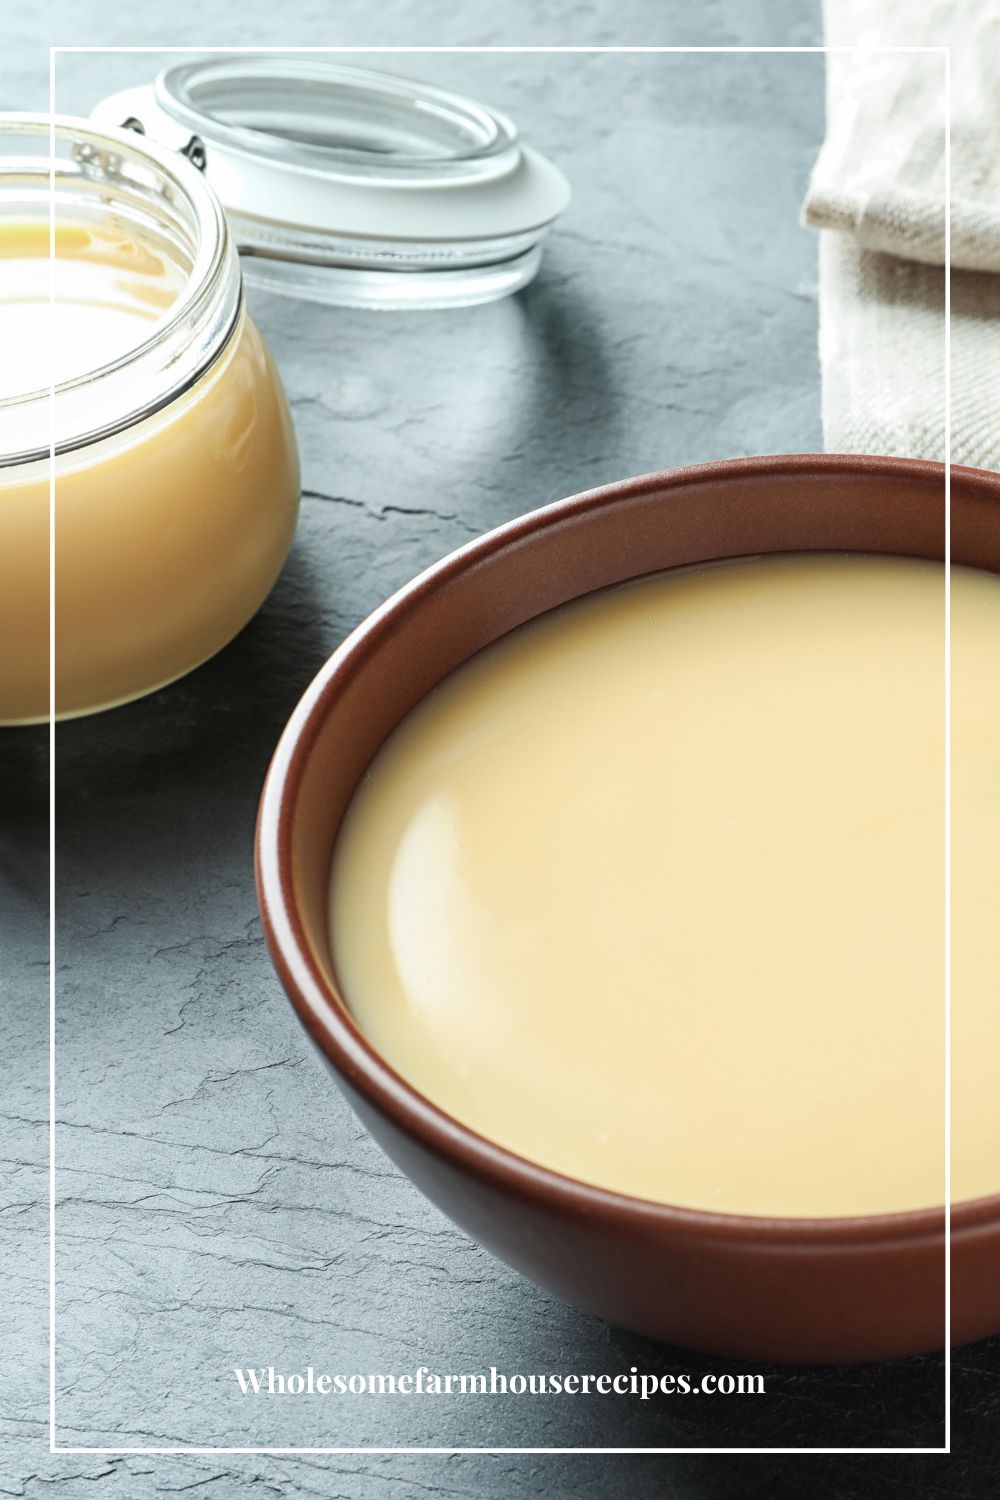 Homemade Sweetened Condensed Milk in Bowl and Container